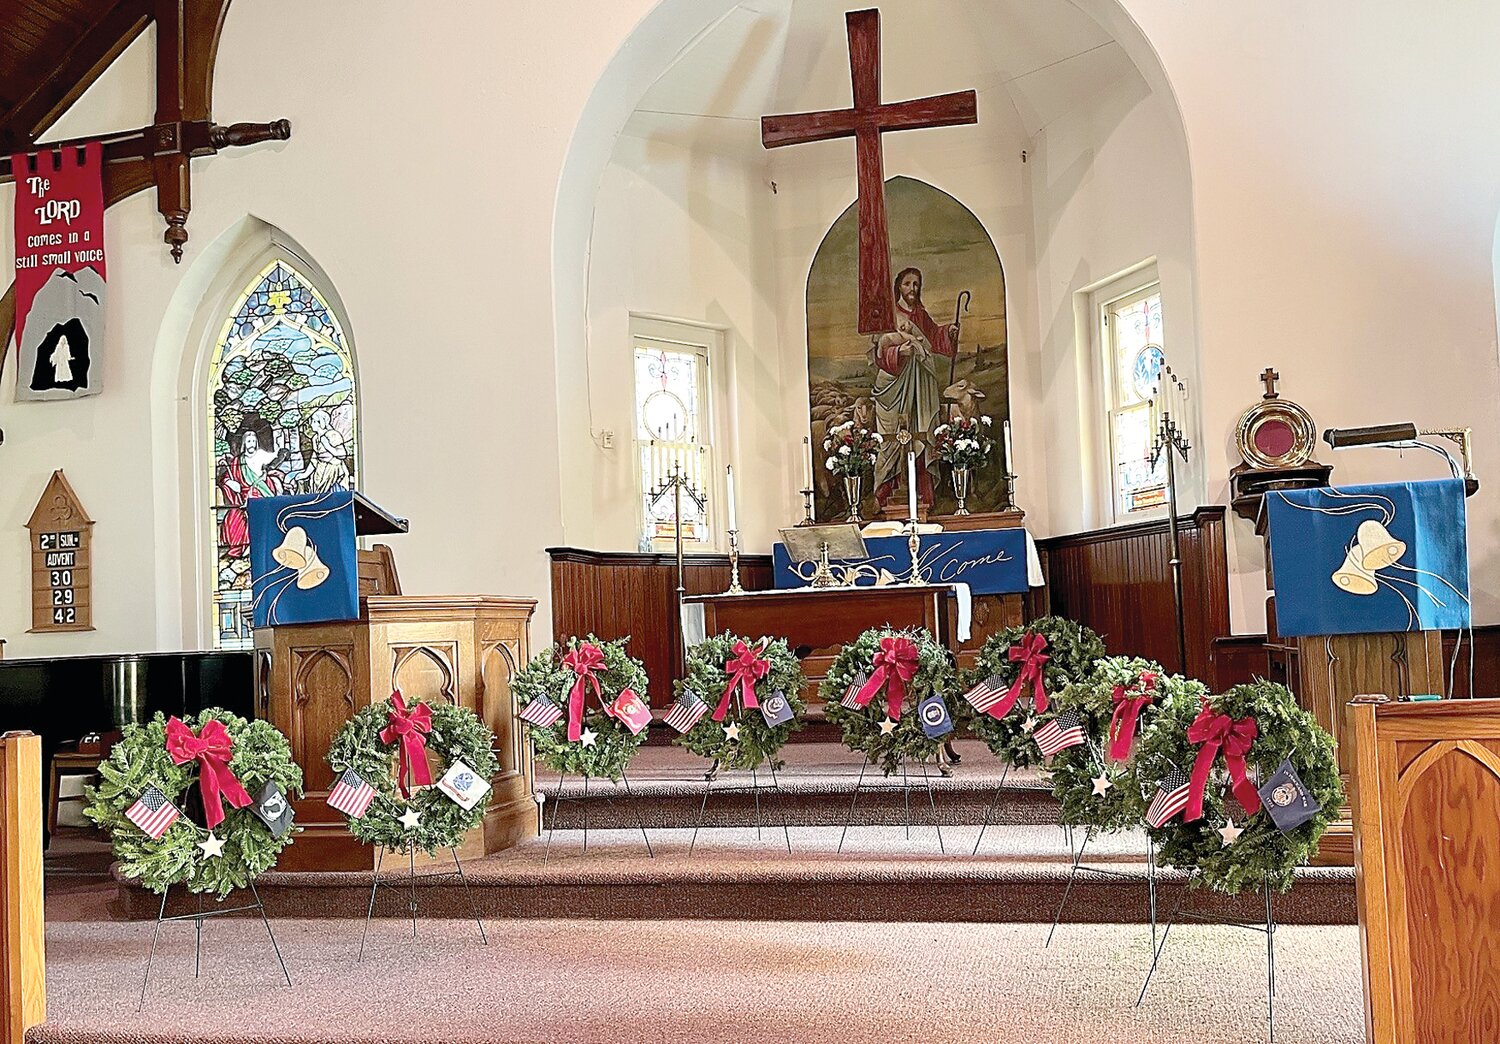 Special extra-large wreaths donated by Wreaths Across America line the altar steps at the Upper Tinicum Lutheran Church in Upper Black Eddy.